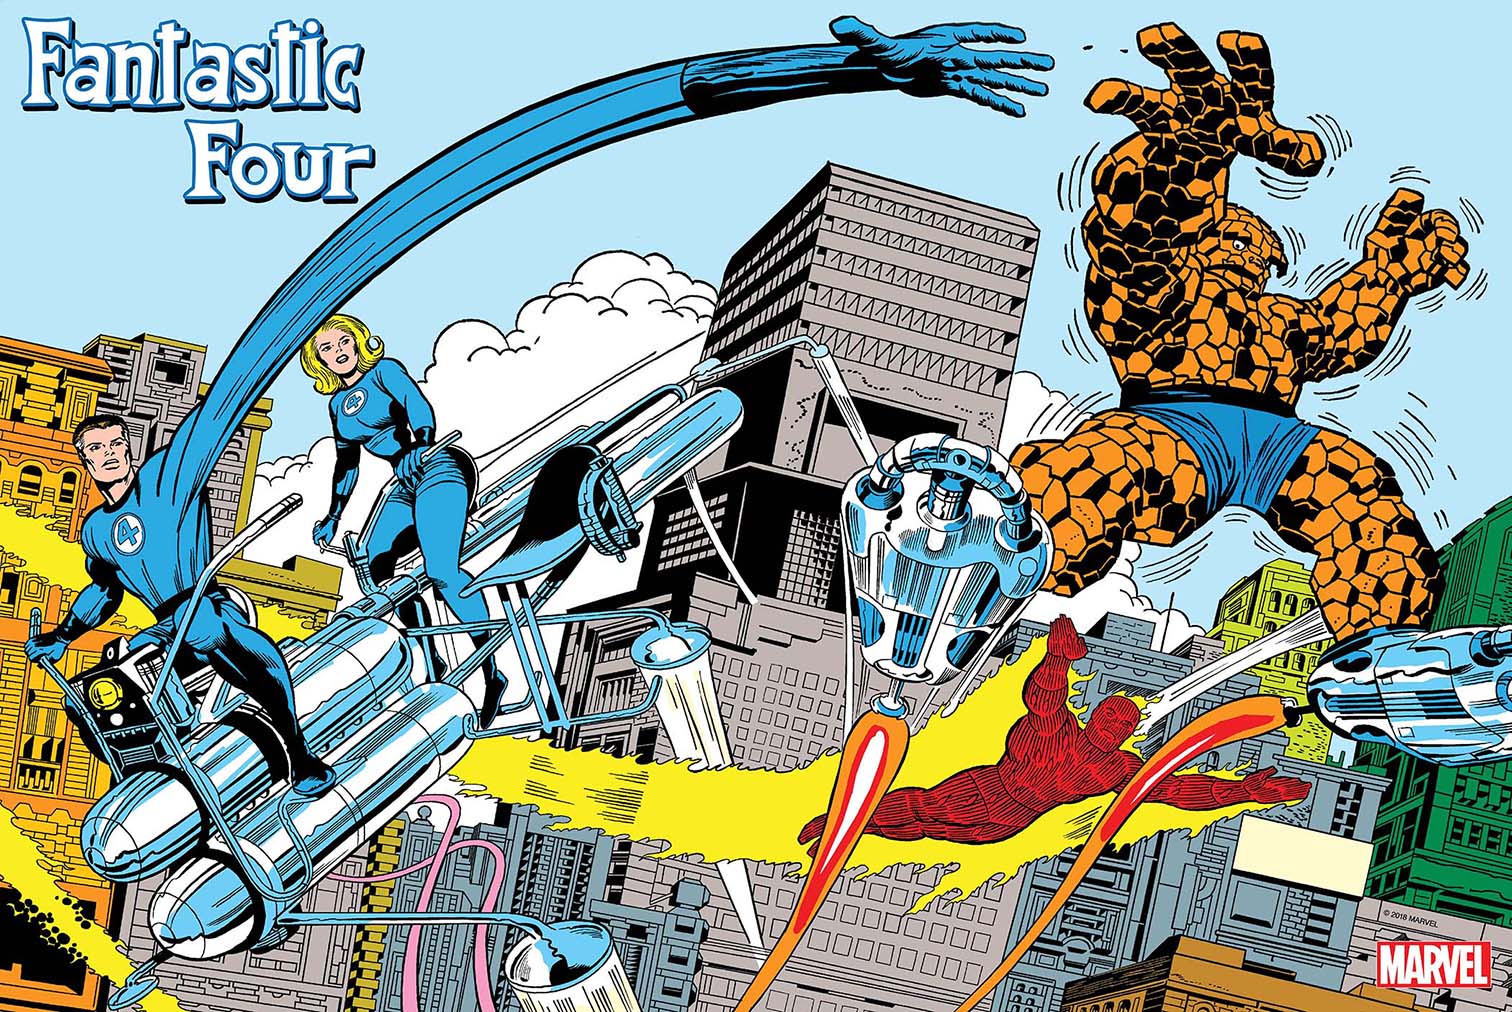 Celebrate the Fantastic Four in style with this Jack Kirby poster